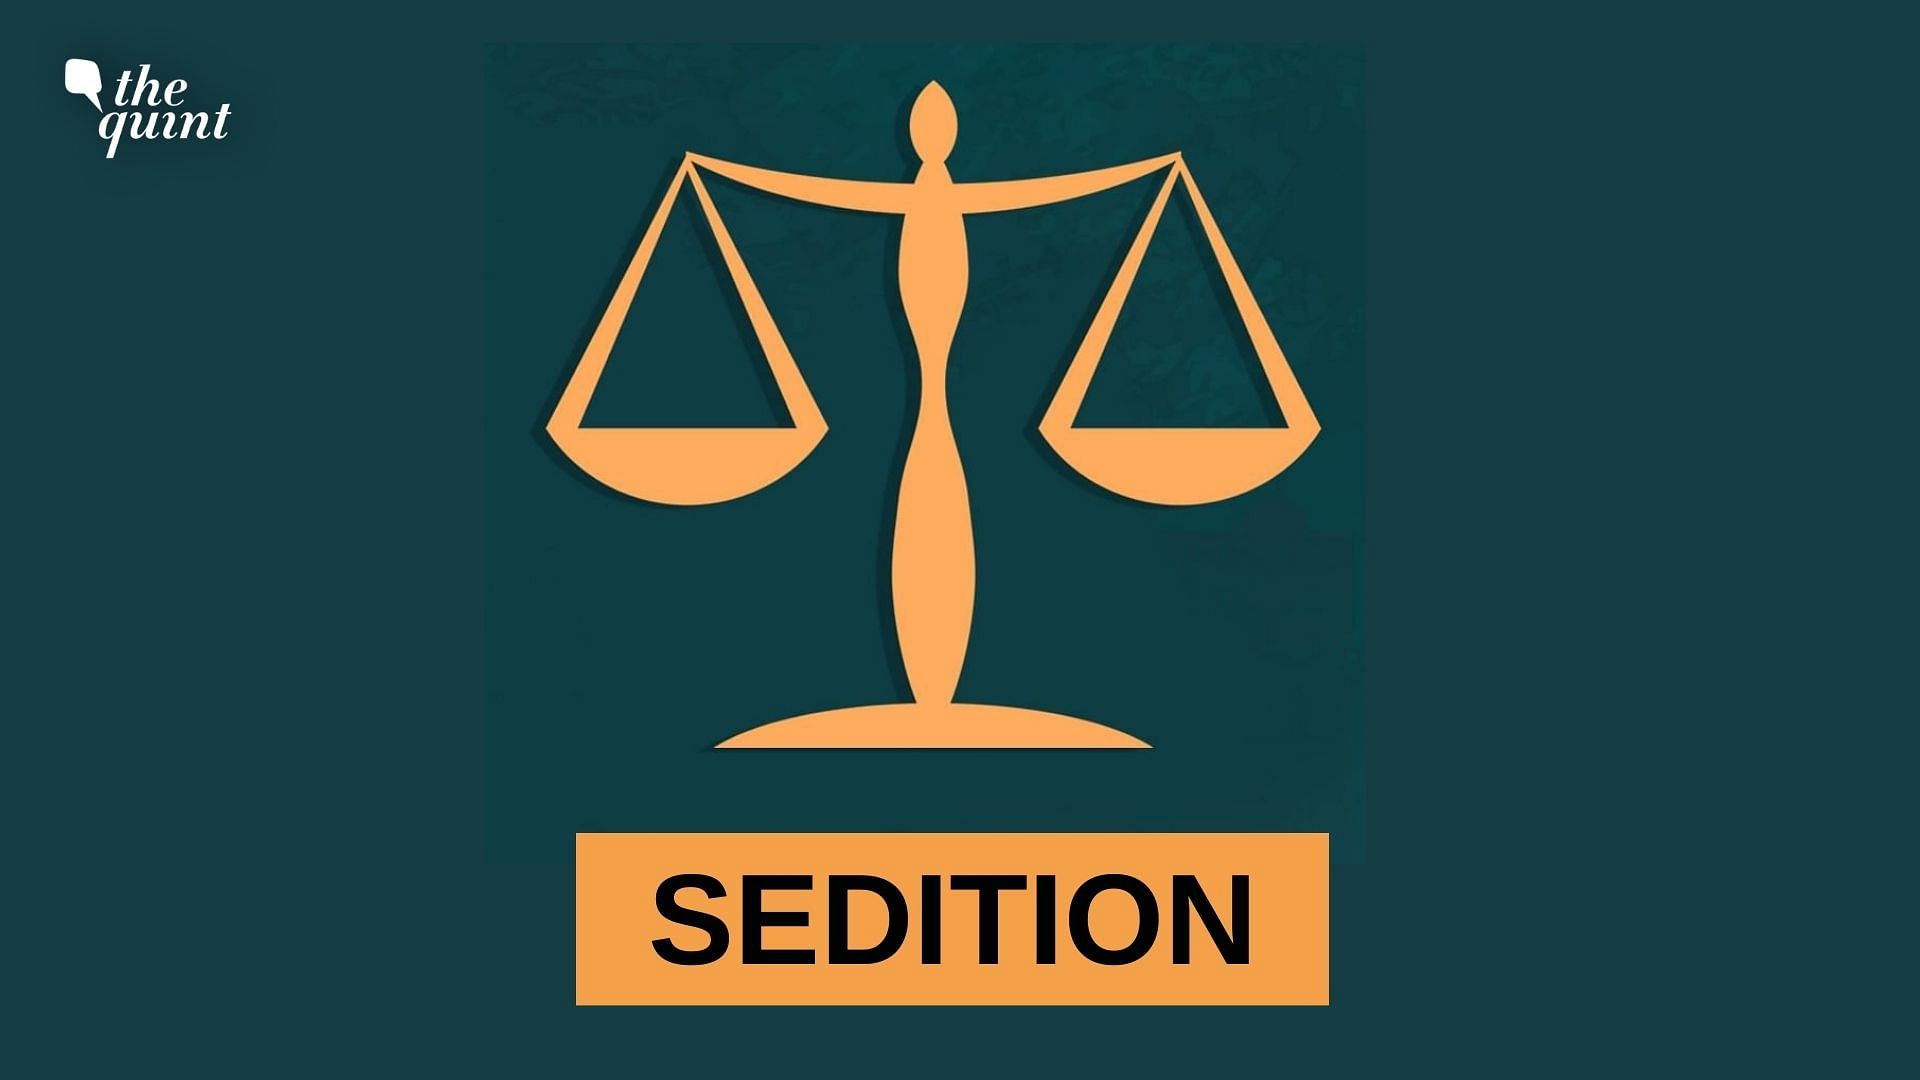 <div class="paragraphs"><p>The Chief Justice of India led bench of the Supreme Court had on Wednesday, said that it would be appropriate "to put the provision (sedition) on abeyance" and "not to use this provision till further re-examination of the sedition law is over."</p></div>